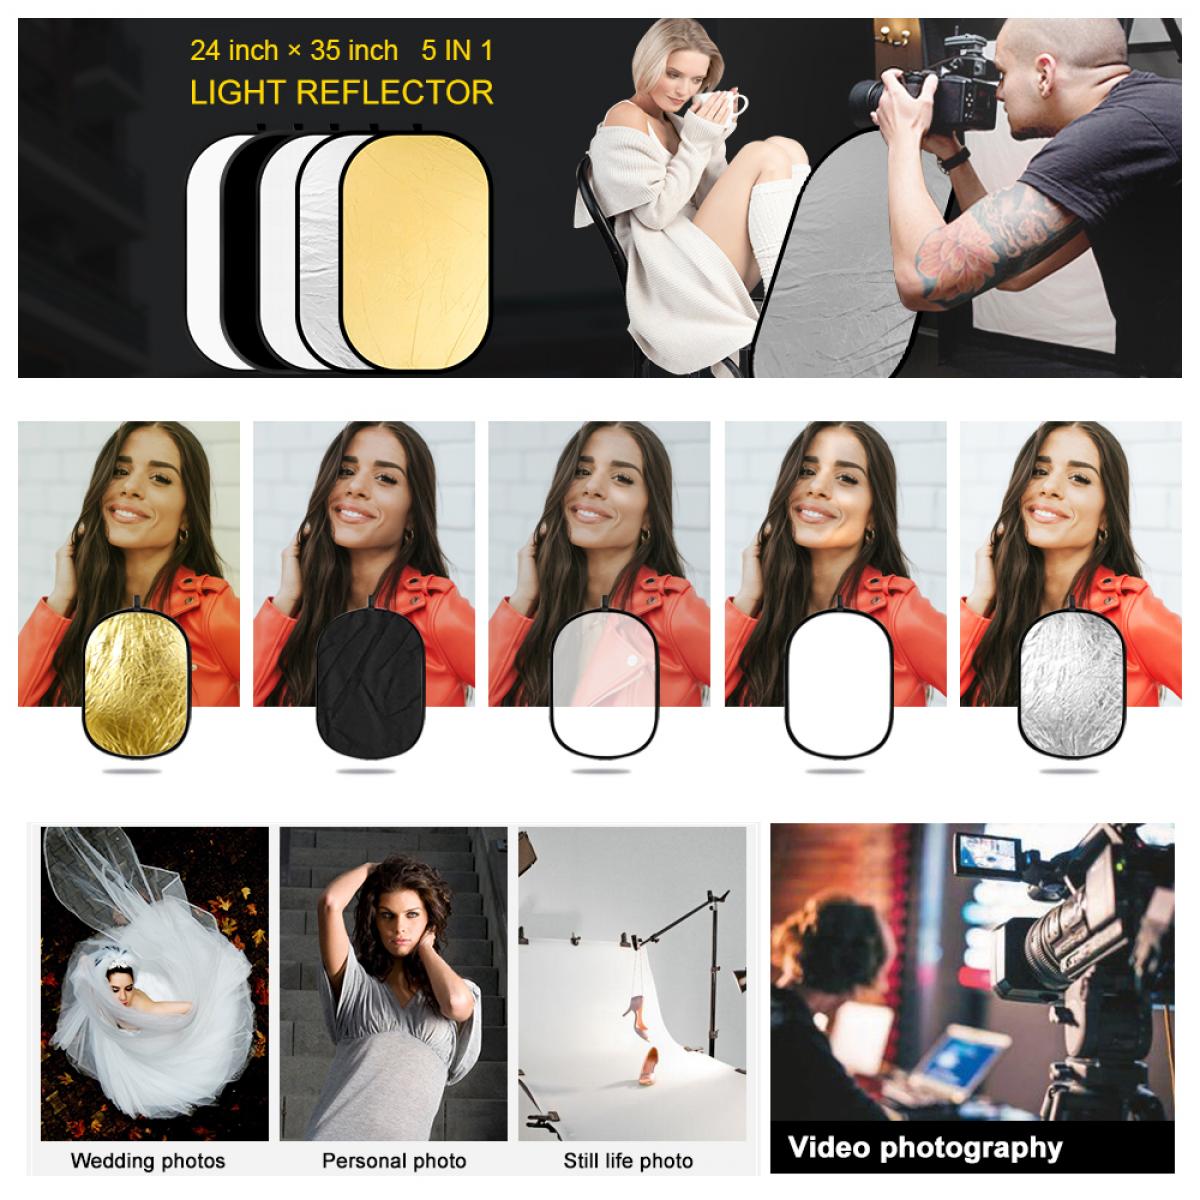 Translucent Photo Light Reflector 35x47inches/ 90x120 cm 5 in 1 Diffuser Photography Collapsible with Bag and Reflector Holder Clips for Studio Outdoor Lighting Gold Silver White and Black 